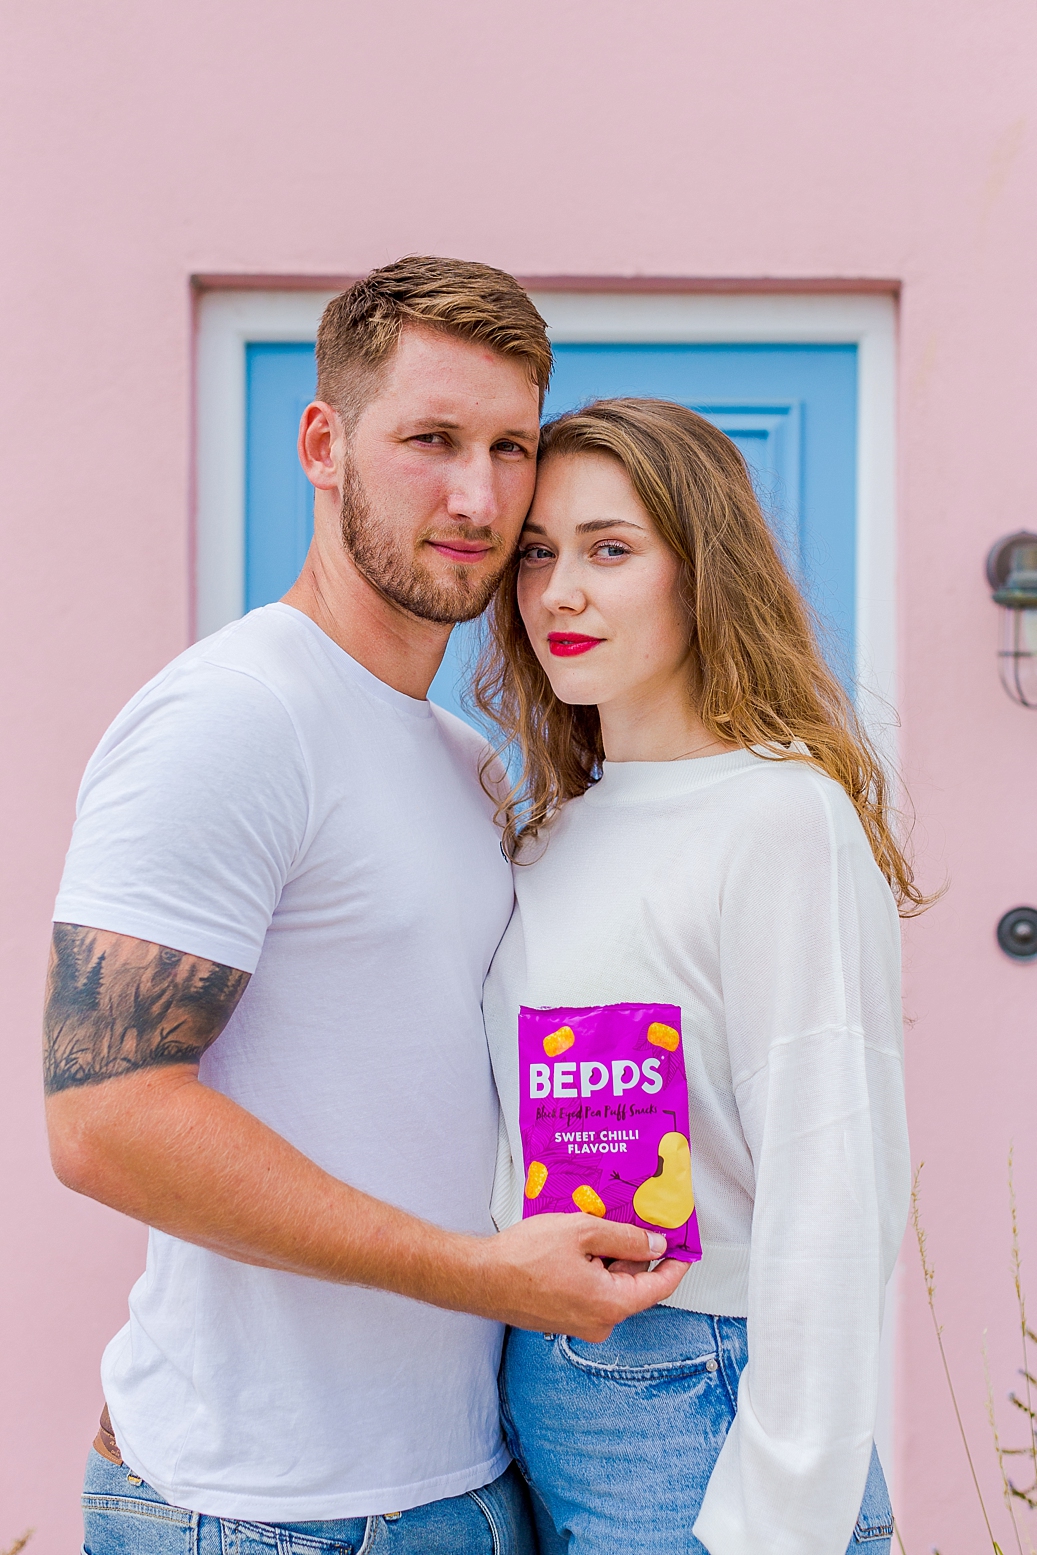 Colourful content creation for Bepps vegan snacks. Product photography & styling by Marianne Taylor.